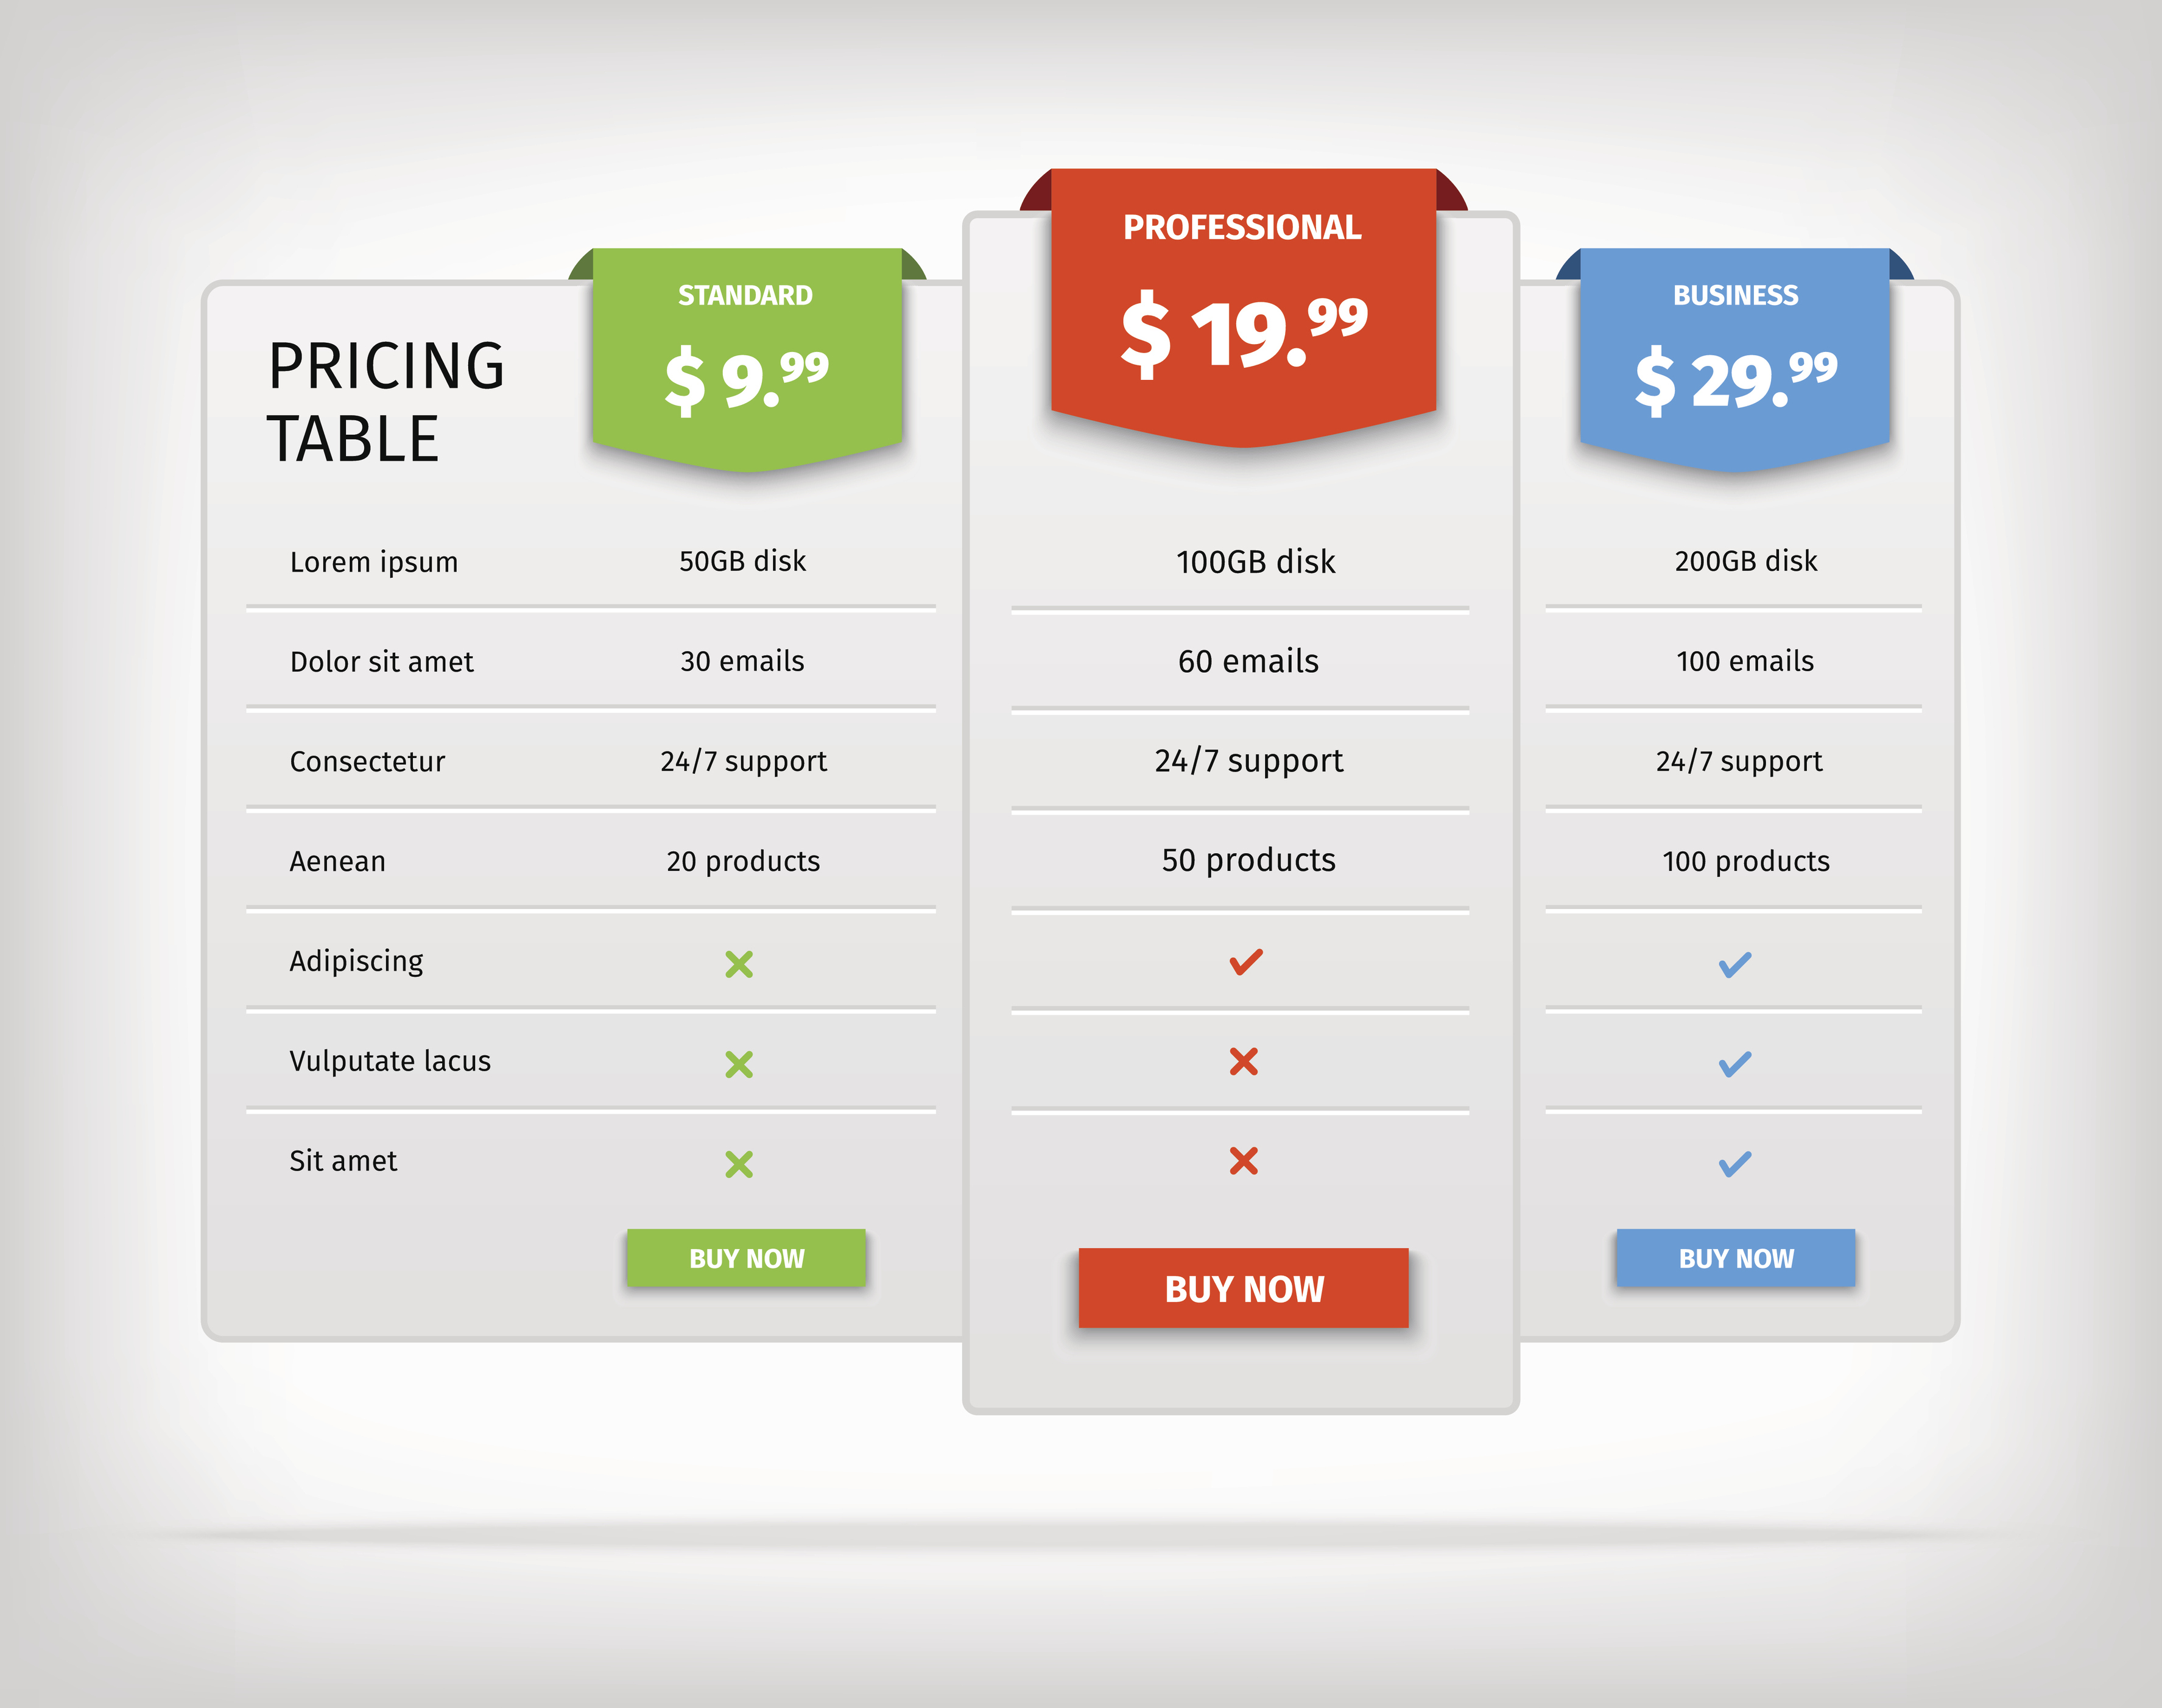 Pricing-table-template-comparison-chart-for-business